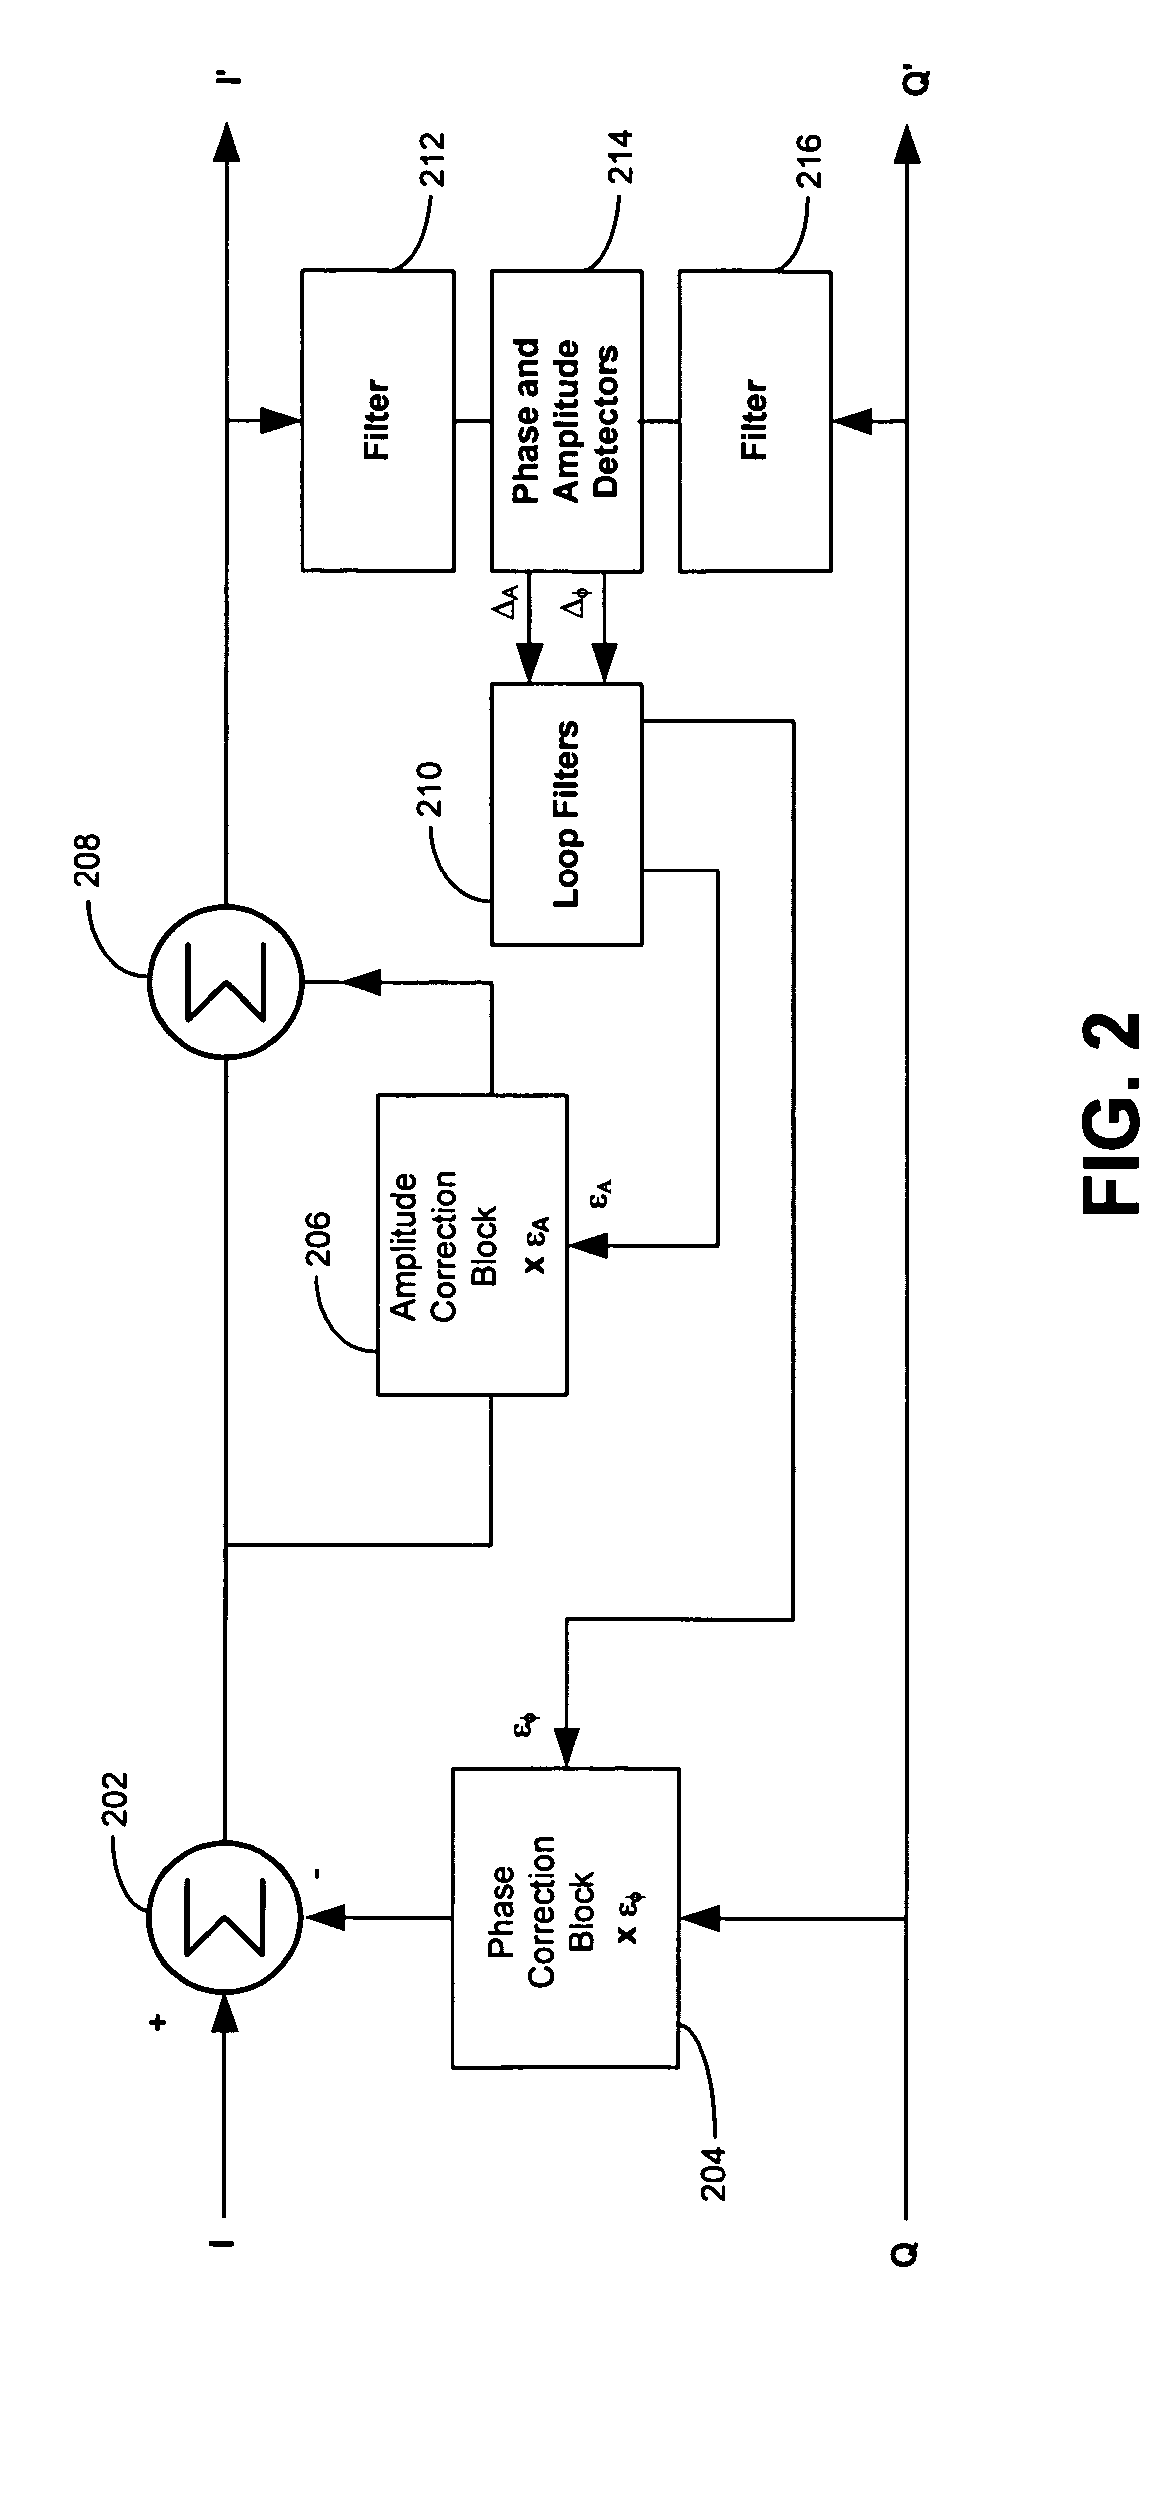 Method and system for enhancing image rejection in communications receivers using test tones and a baseband equalizer